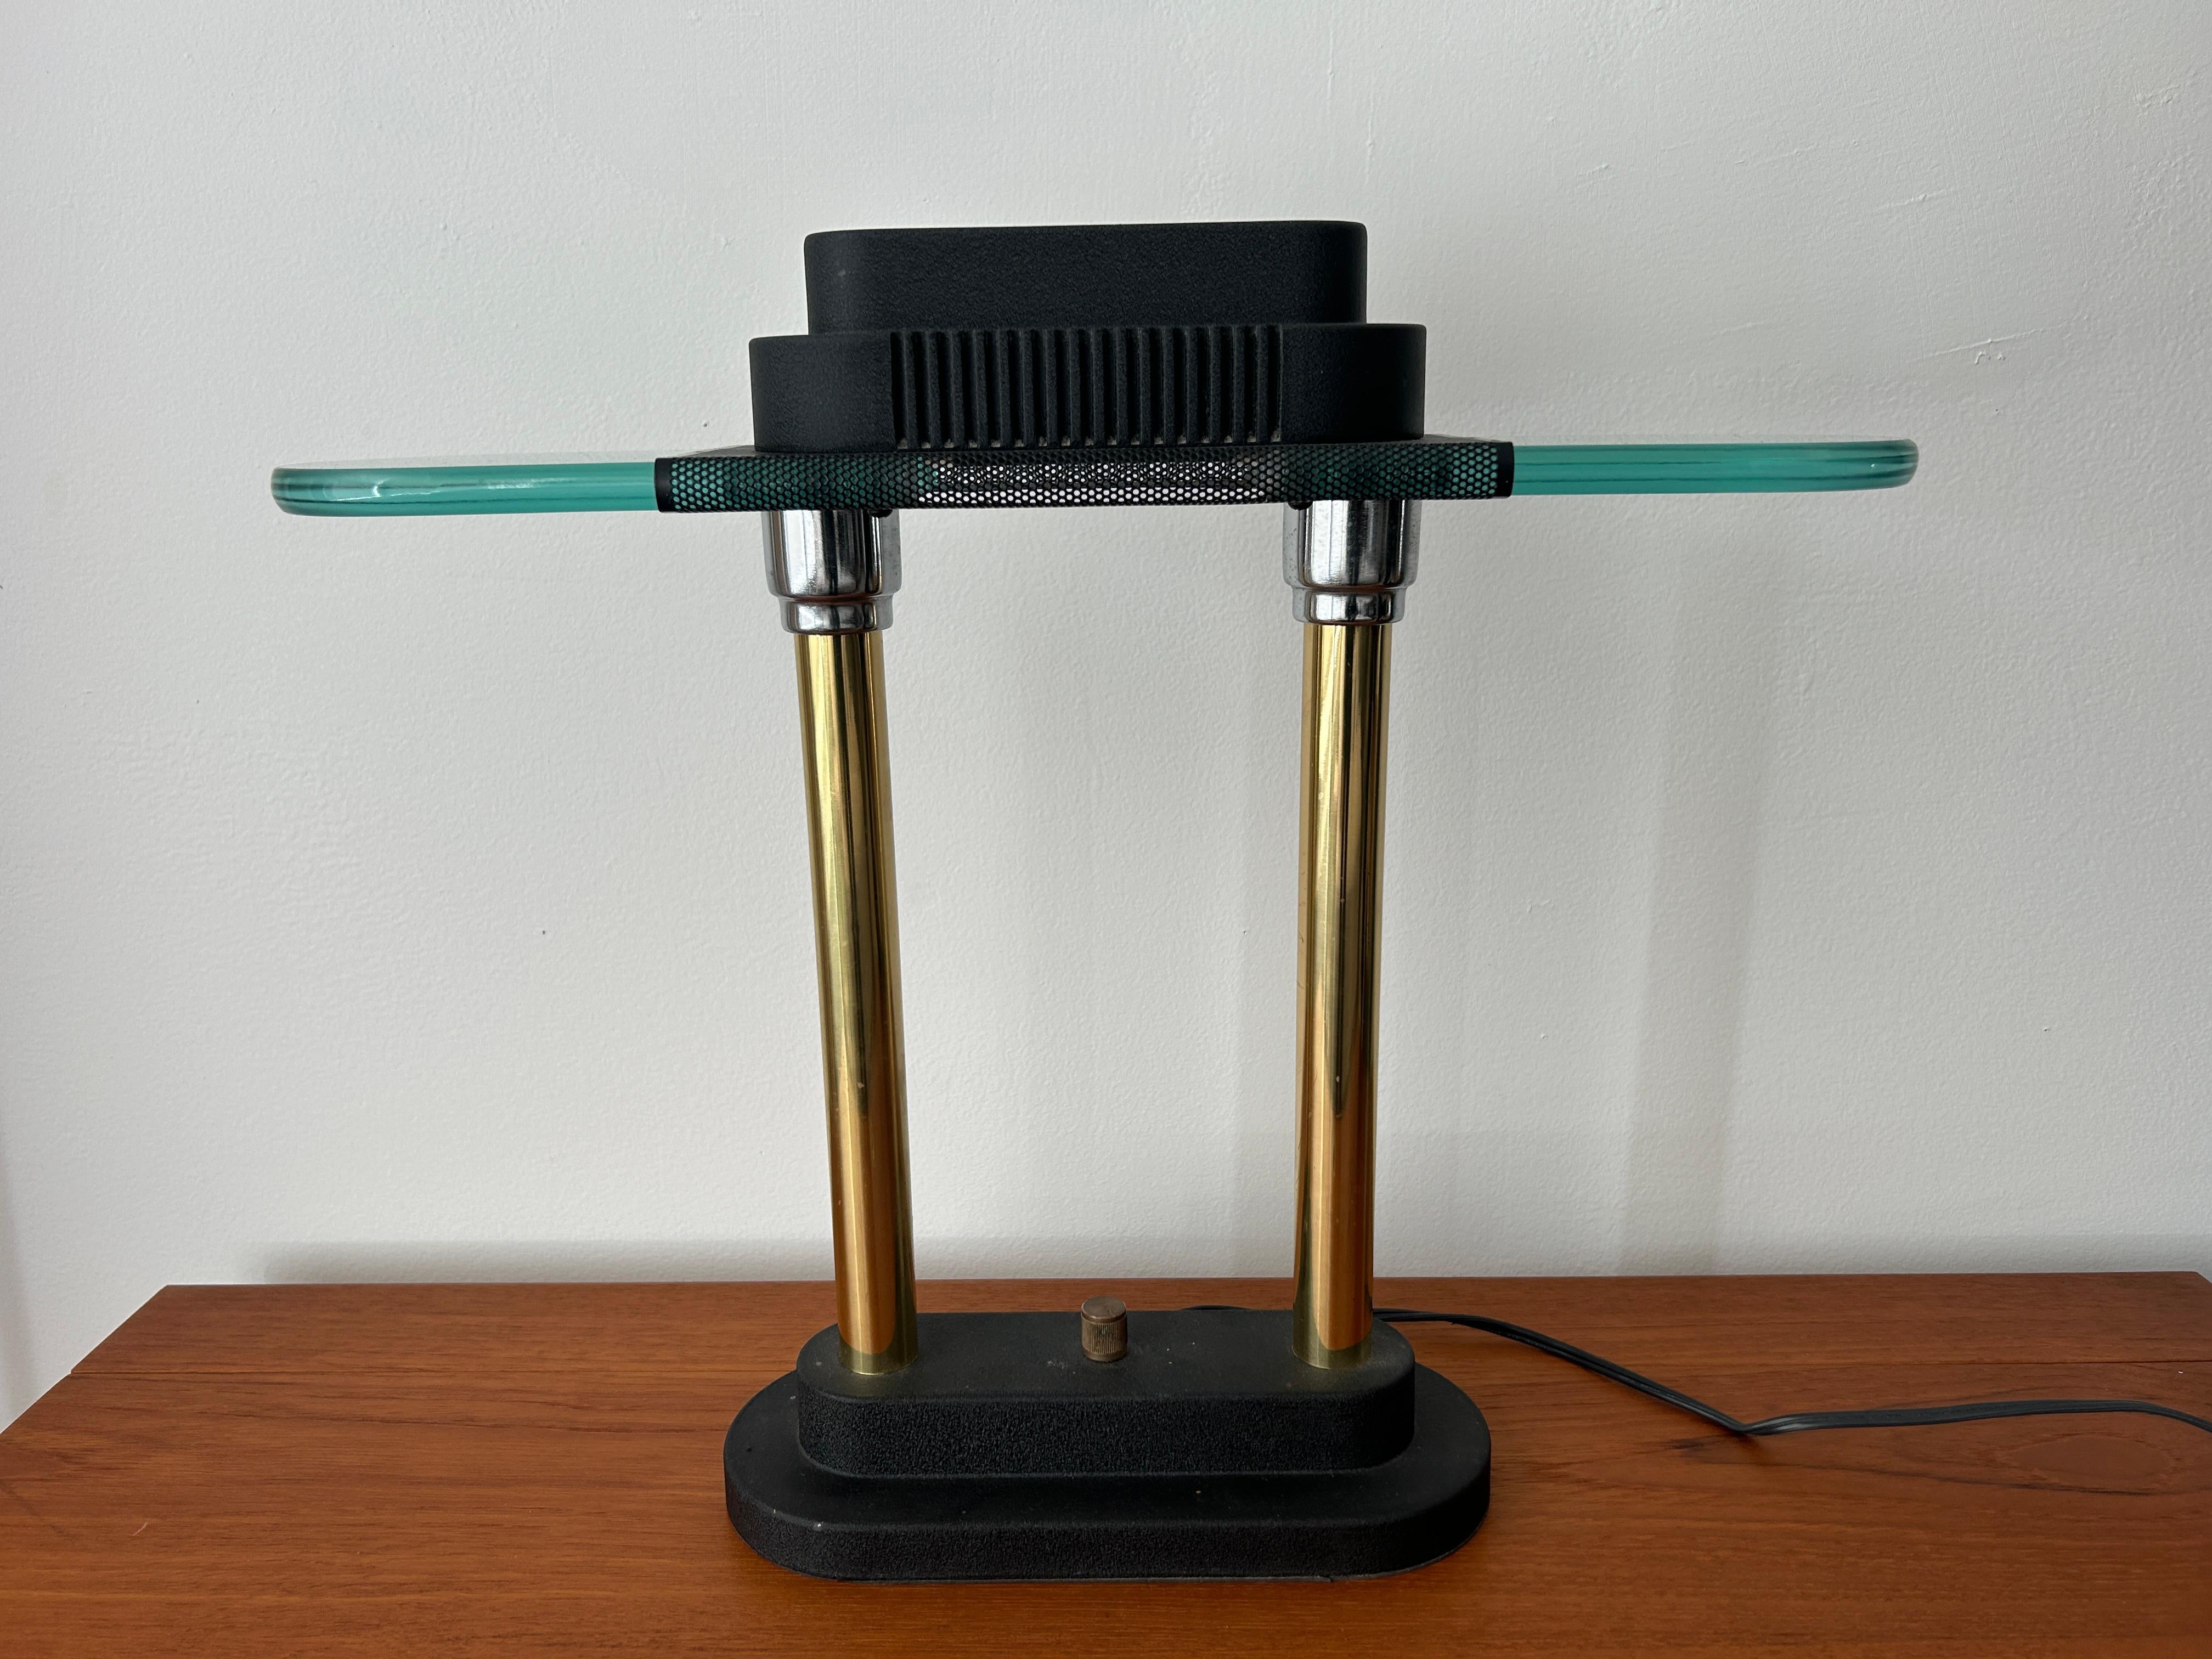 Postmodern design halogen desk lamp after Robert Sonneman for Kovacs. Use with halogen light bulb 60 watts max. Dimmer switch with knob to center of base.  

Dimensions: H 15.25 in. x W 17.5 in. x D 4.75 in. Base dimensions 9.5 W x 4 inches